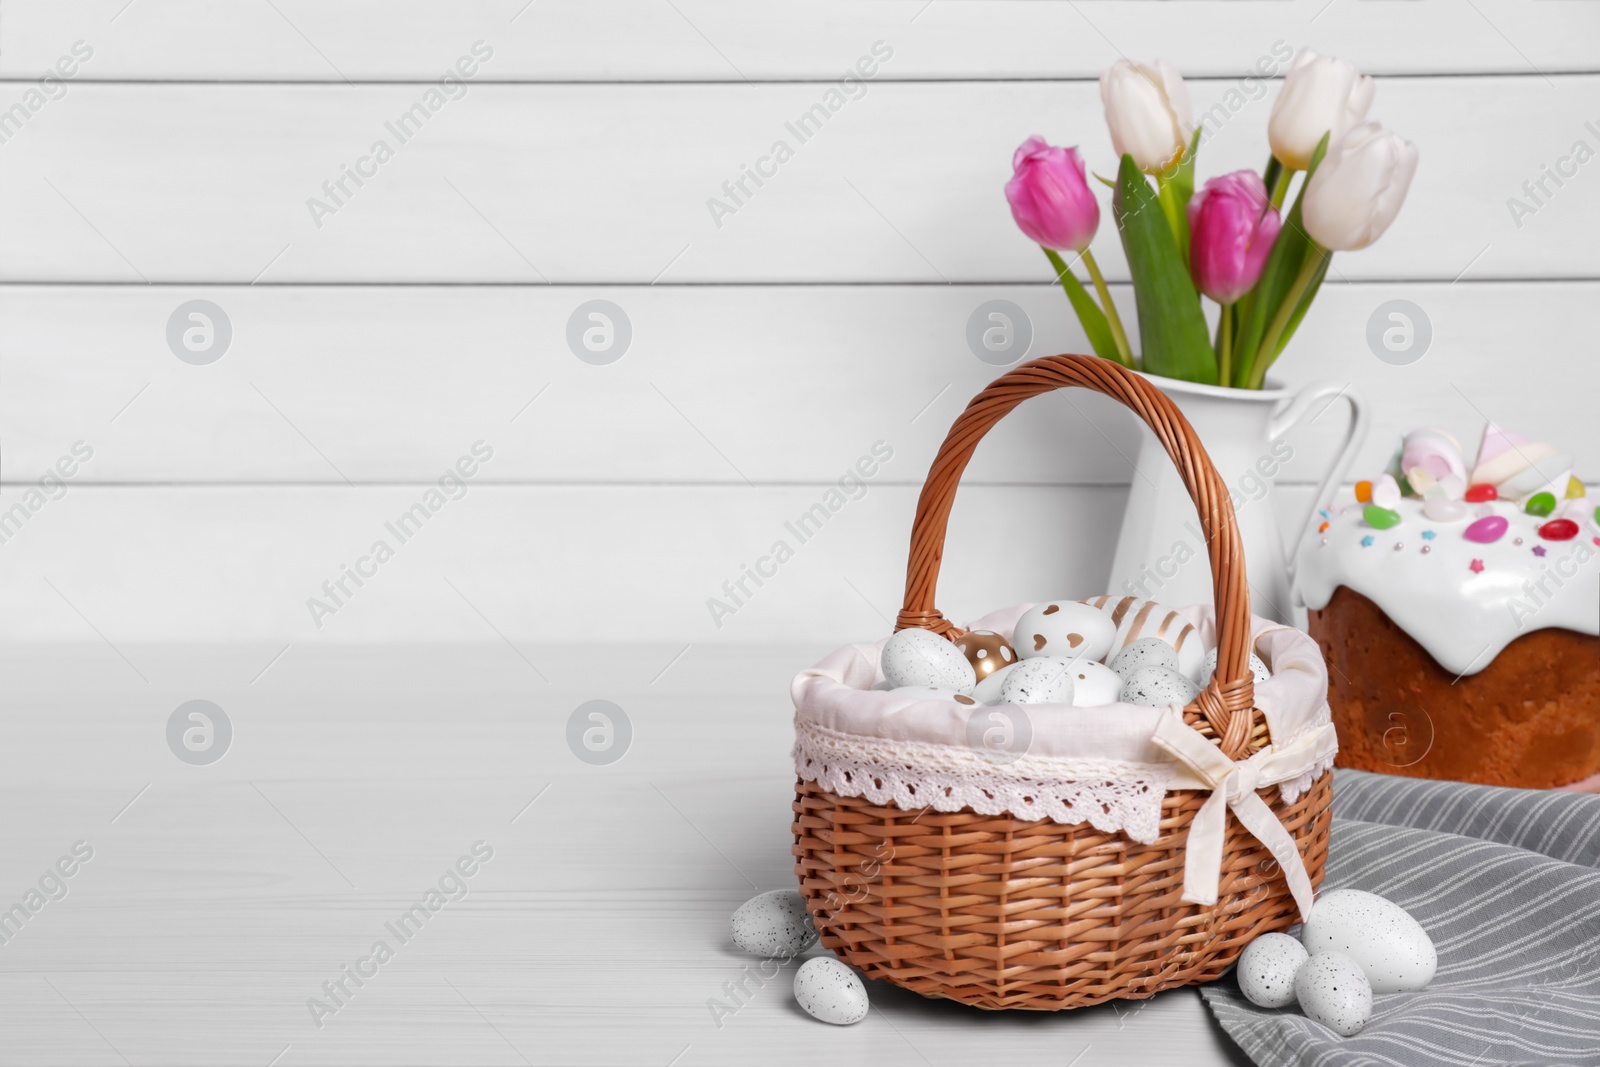 Photo of Wicker basket with festively decorated eggs, beautiful tulips and traditional Easter cake on white wooden table. Space for text